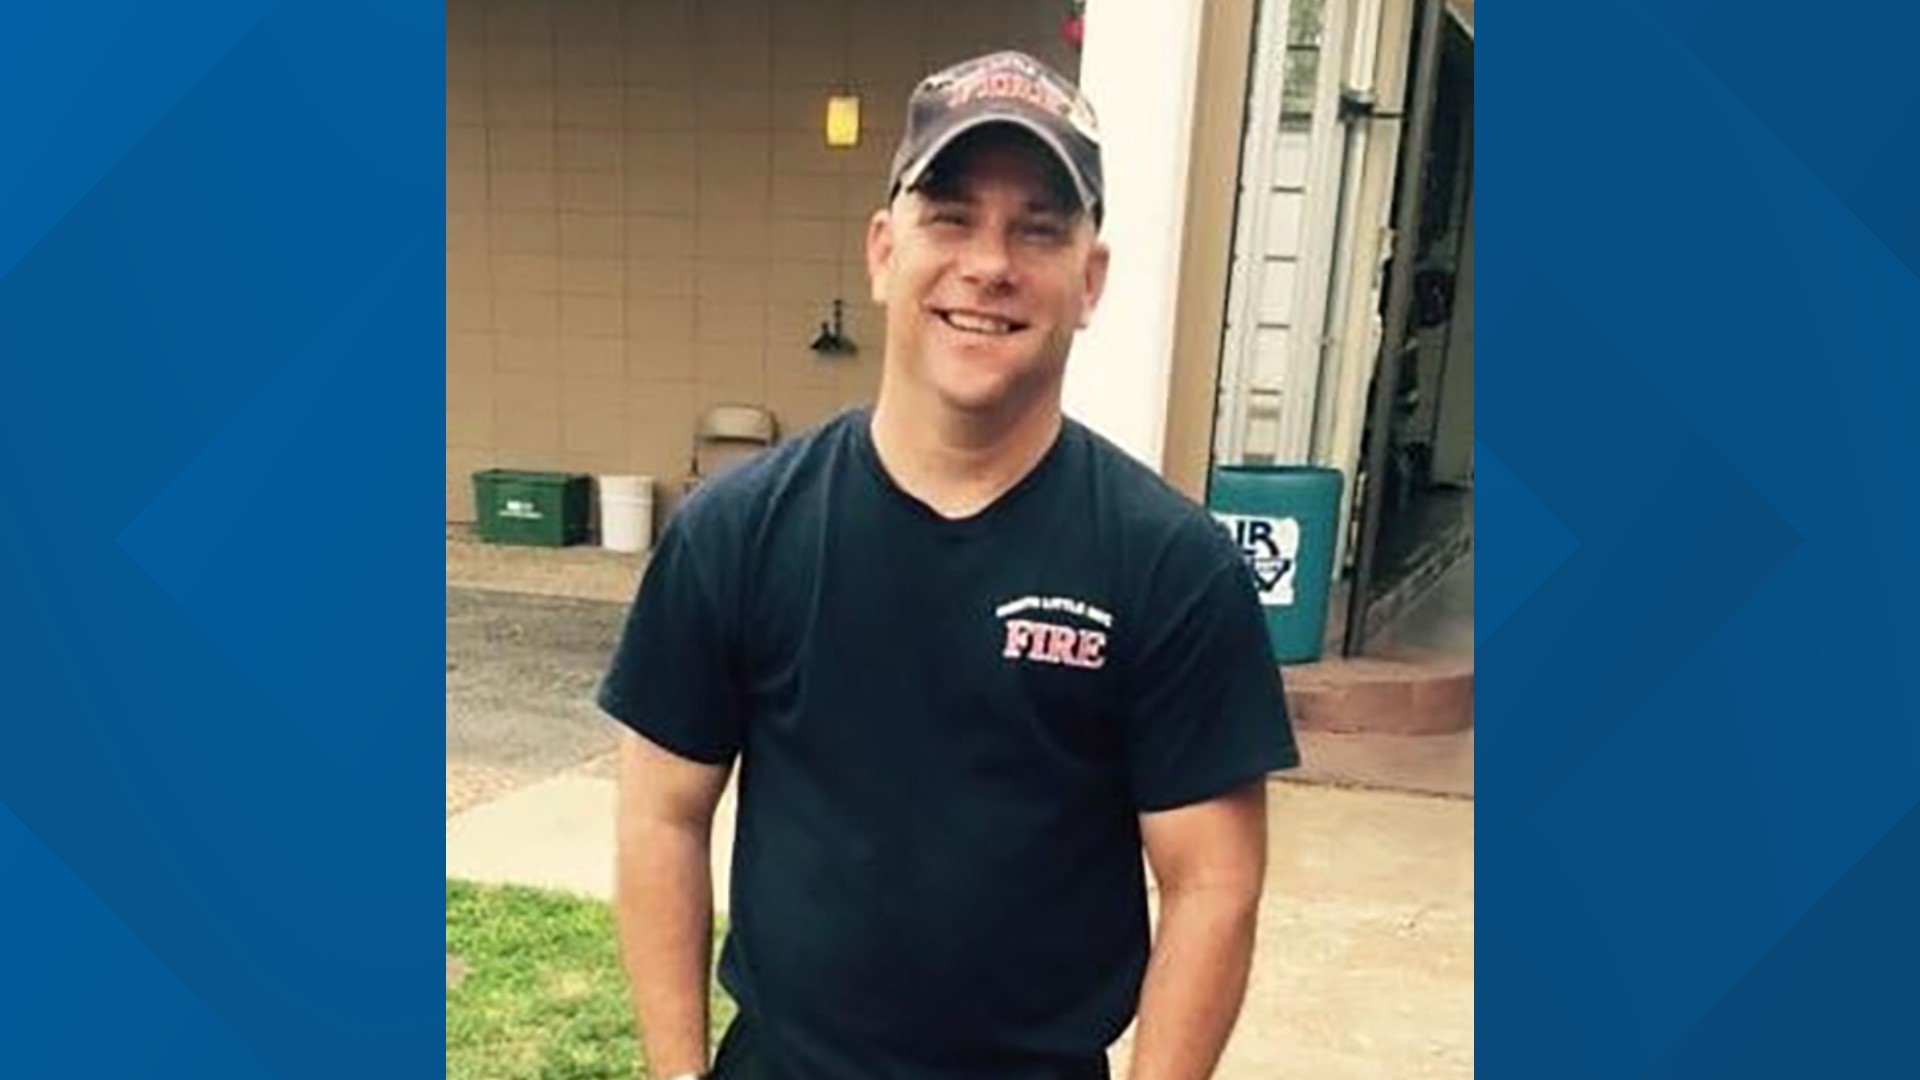 The North Little Rock Fire Department announced Saturday that Lt. Scott Chassells died due to COVID-19 complications.